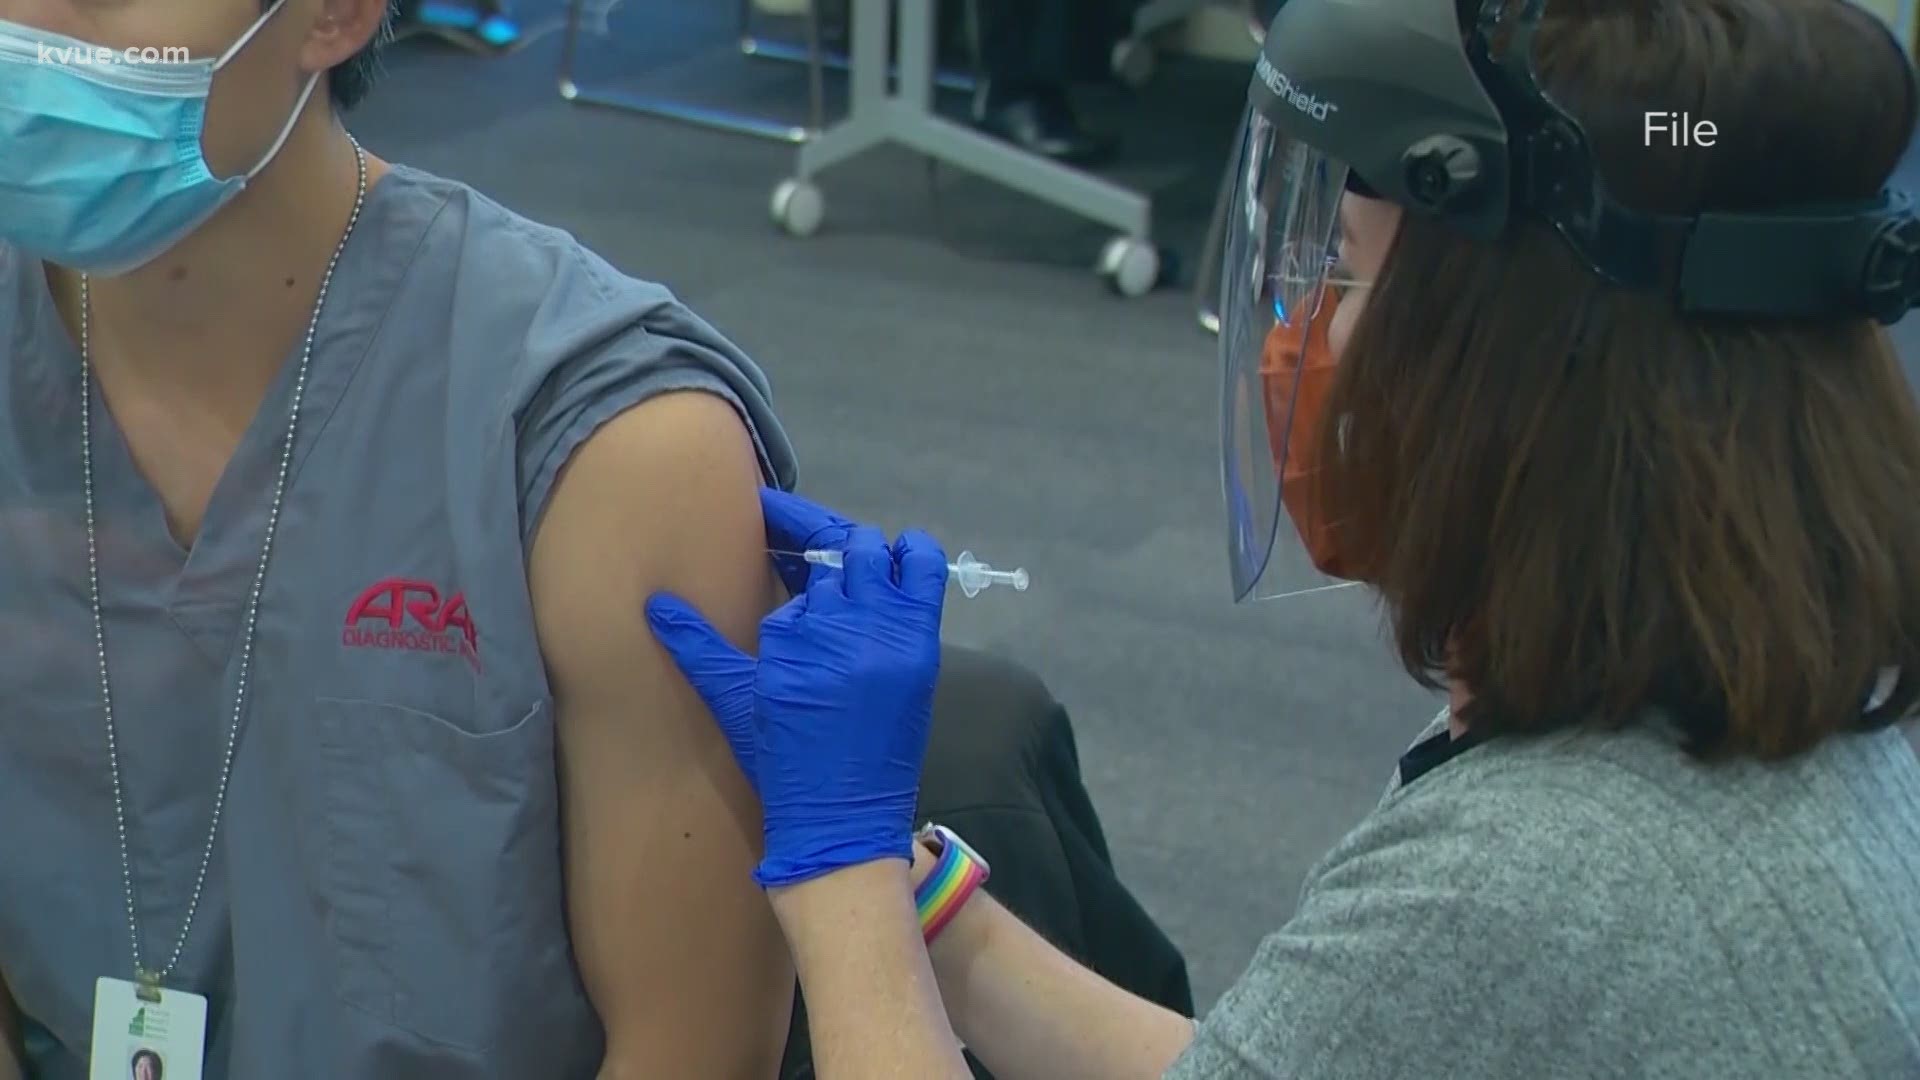 Williamson County is getting ready to receive thousands of doses of the COVID-19 vaccine after a delay. KVUE's Jenni Lee explains.